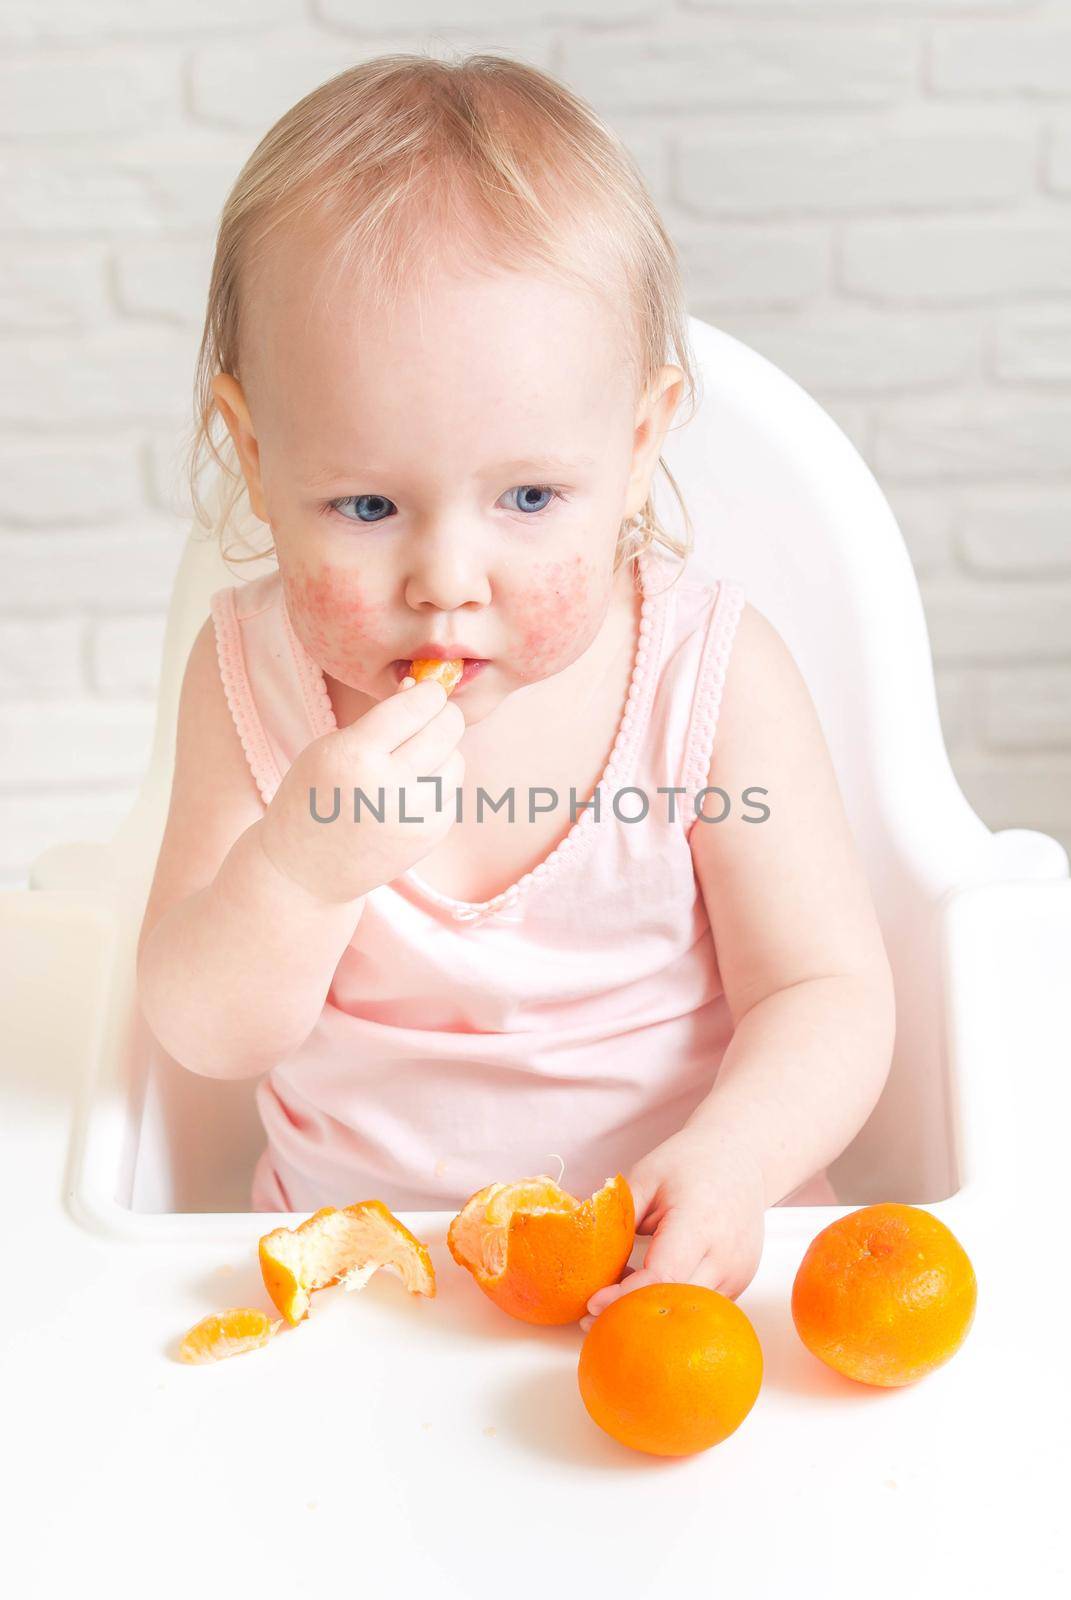 Cute child toddler with food allergy on face by maramorosz